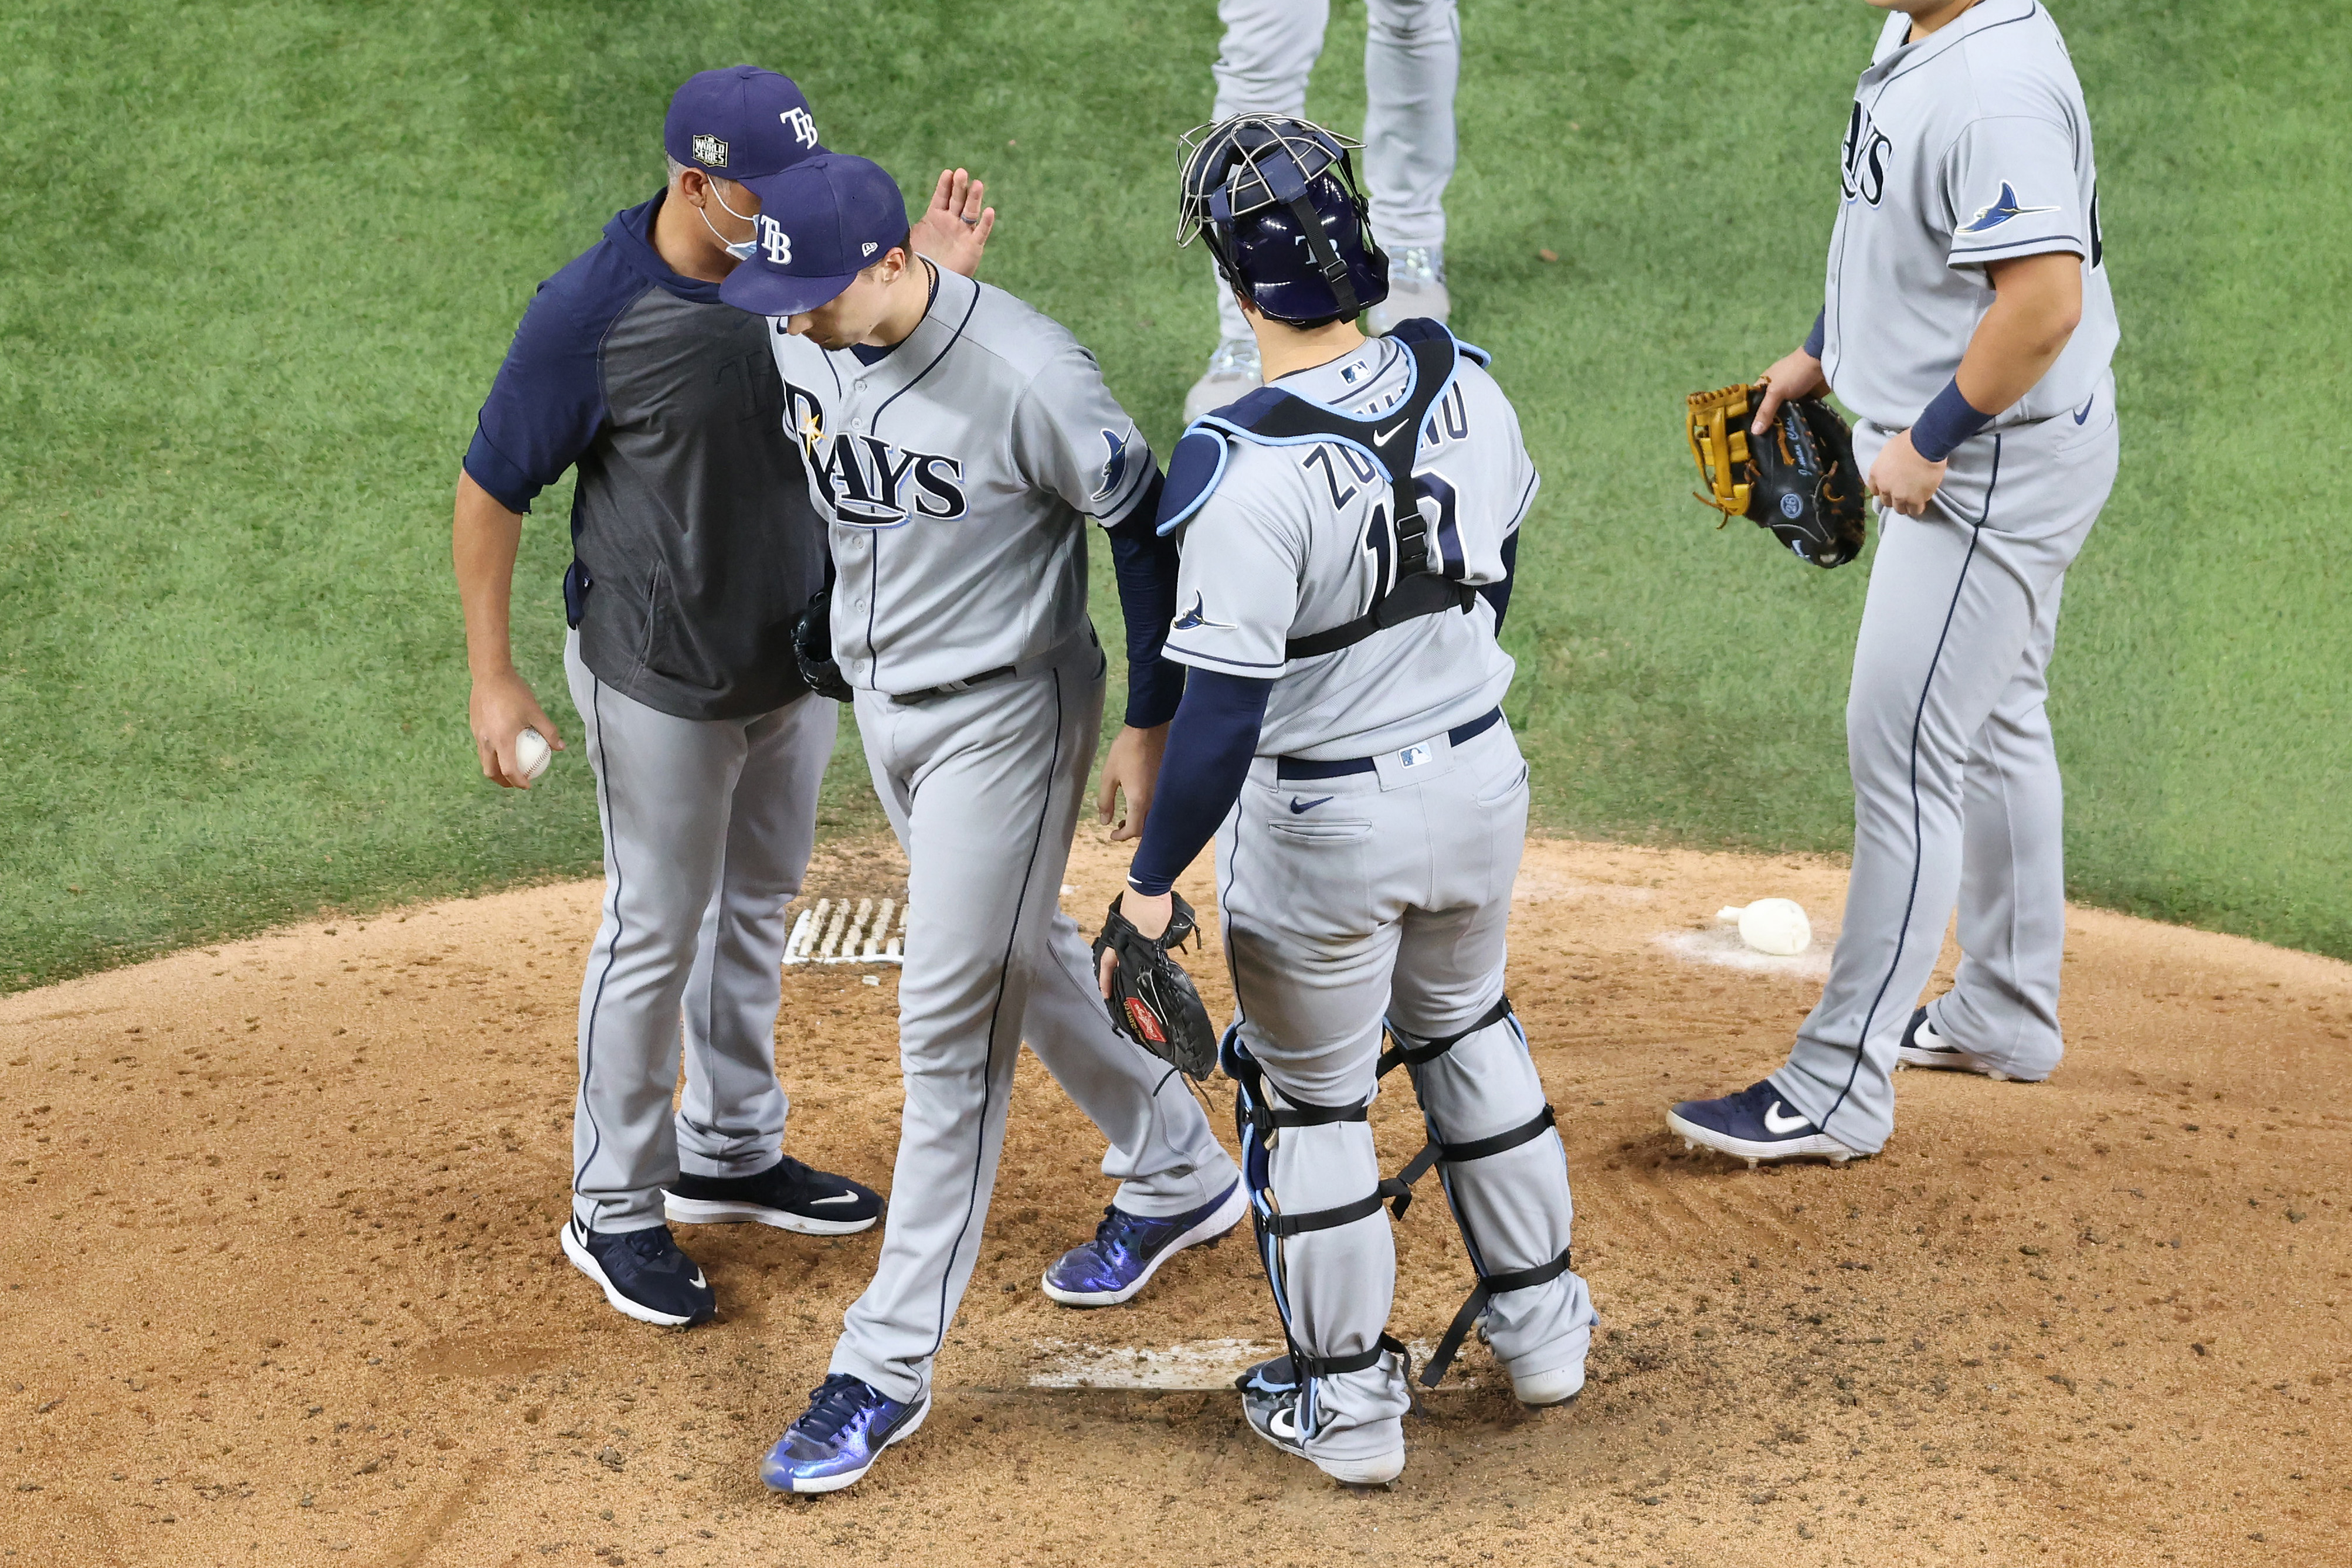 Blake Snell says if he's not getting full salary, restarting MLB is 'just  not worth it